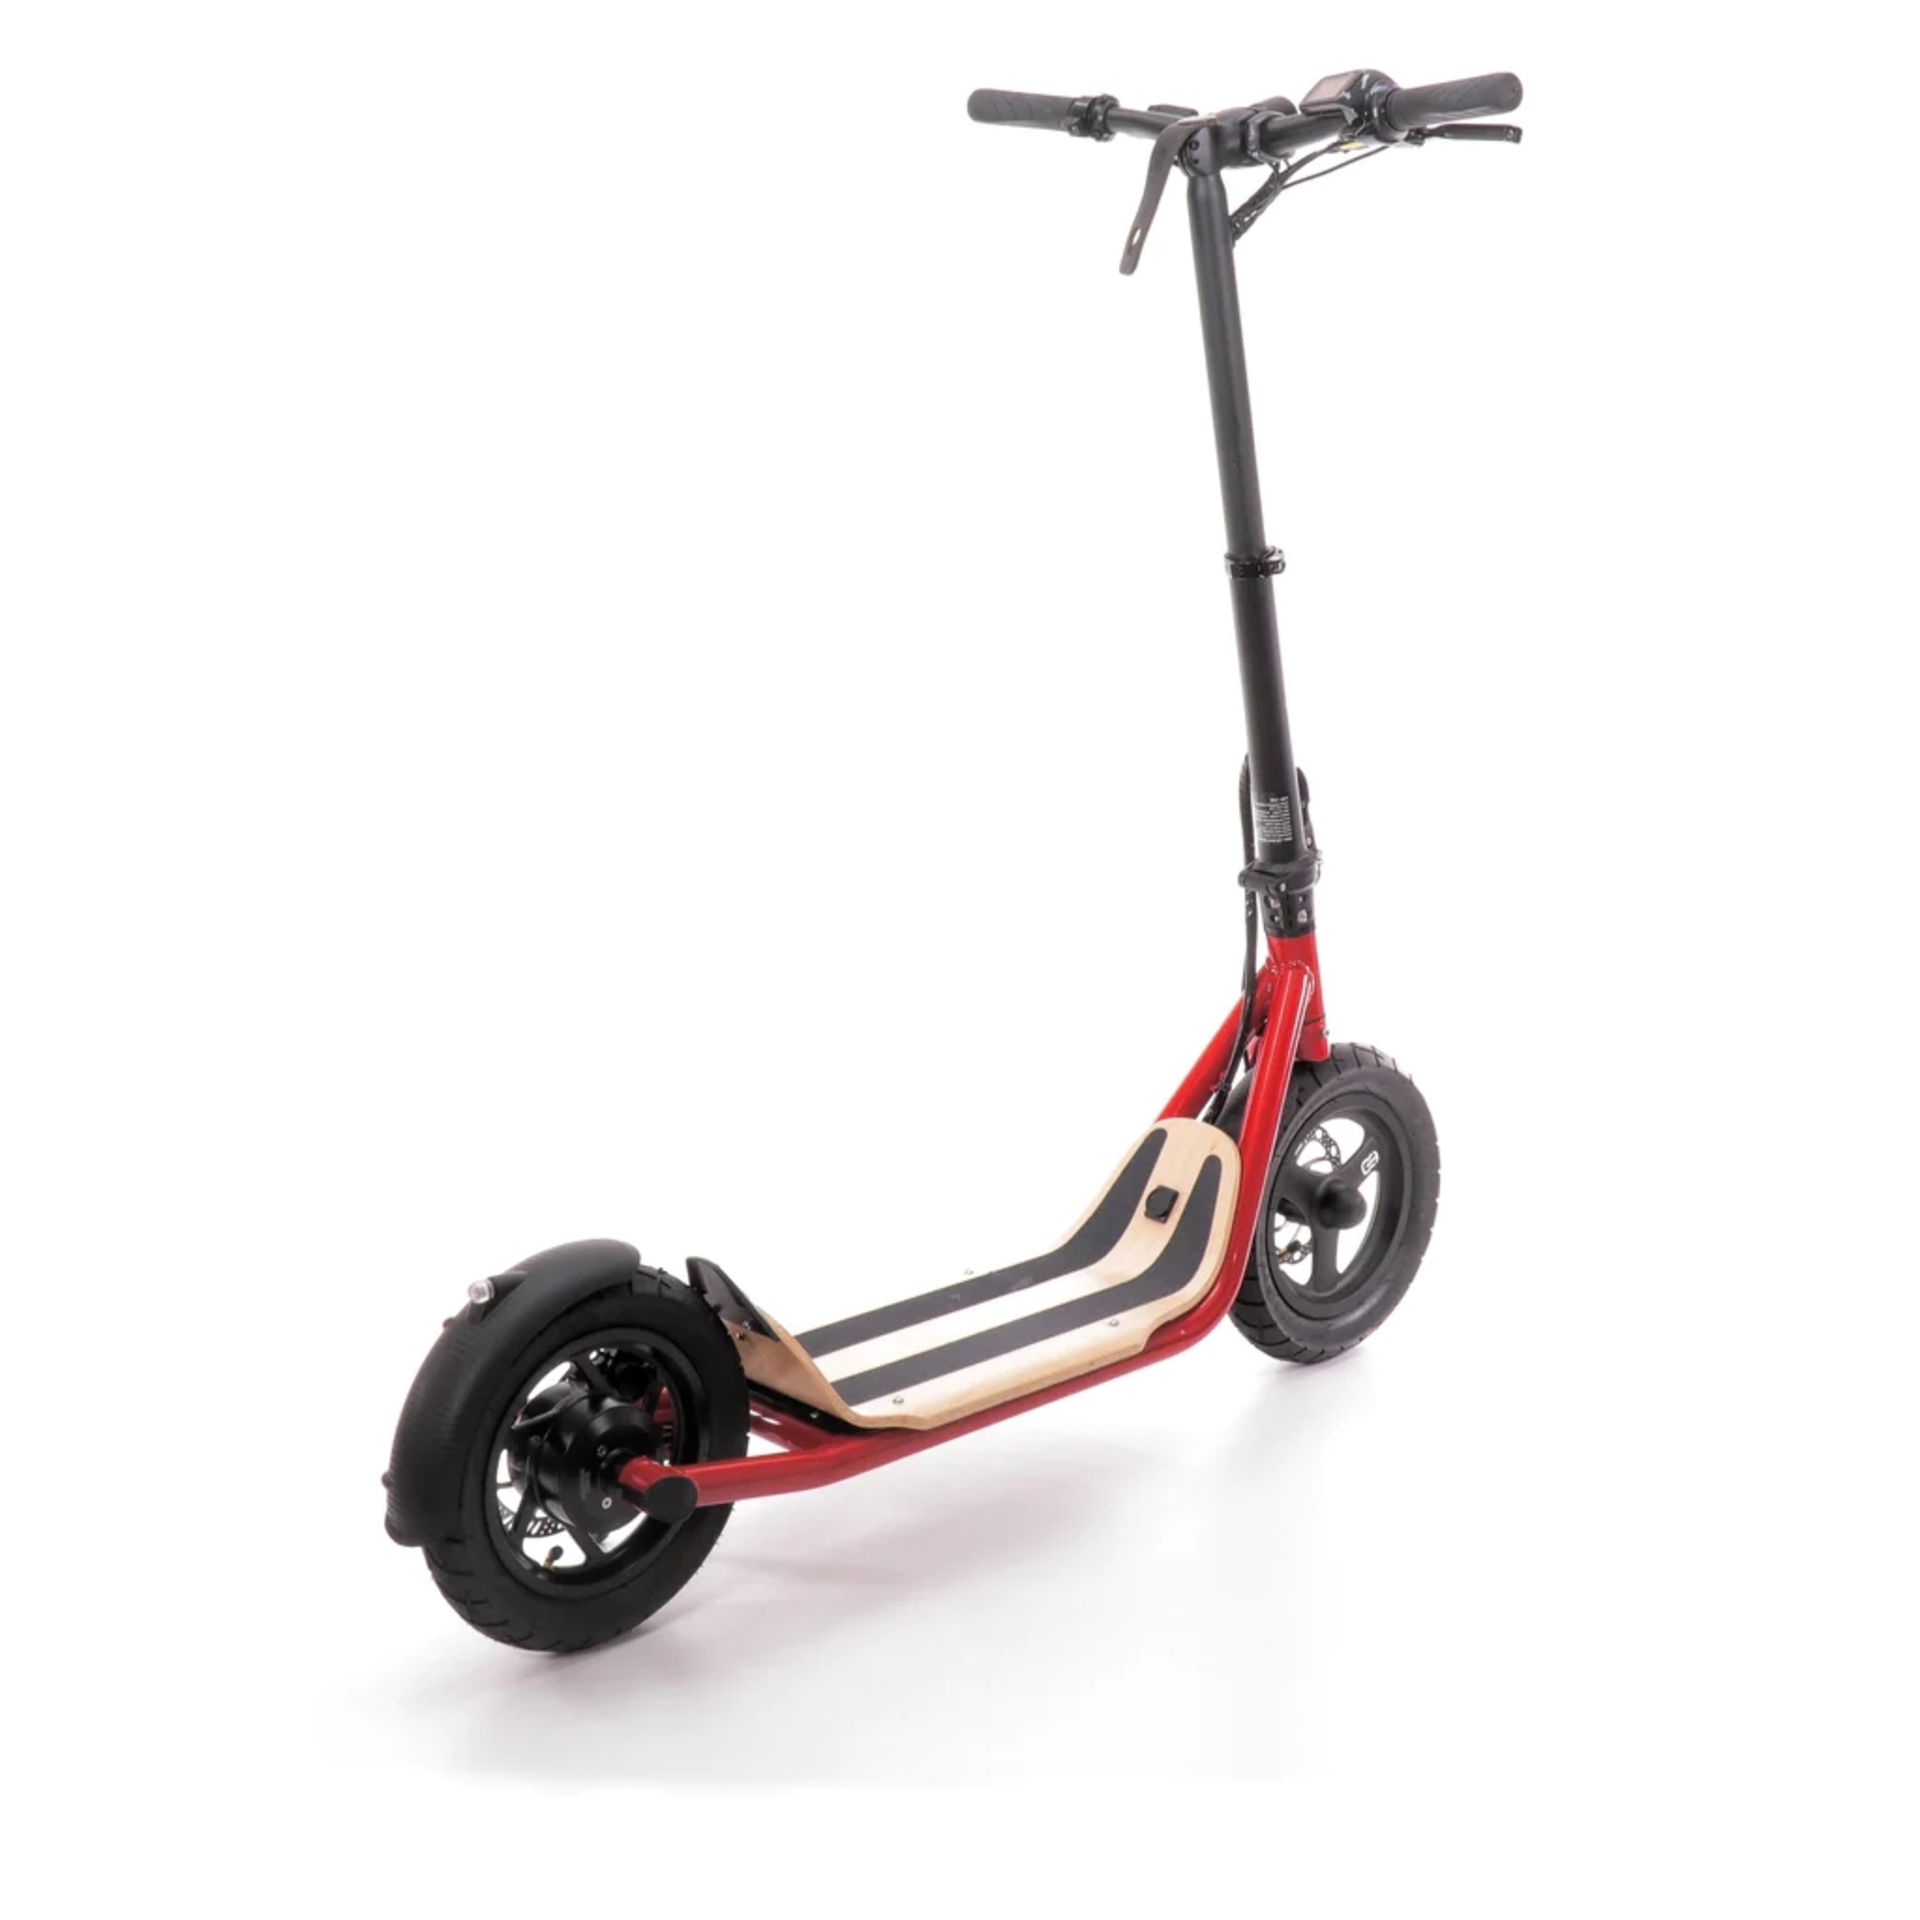 BRAND NEW 8TEV B12 PROXI CLASSIC ELECTRIC SCOOTER RED RRP £1299, Perfect city commuter vehicle - Bild 2 aus 3